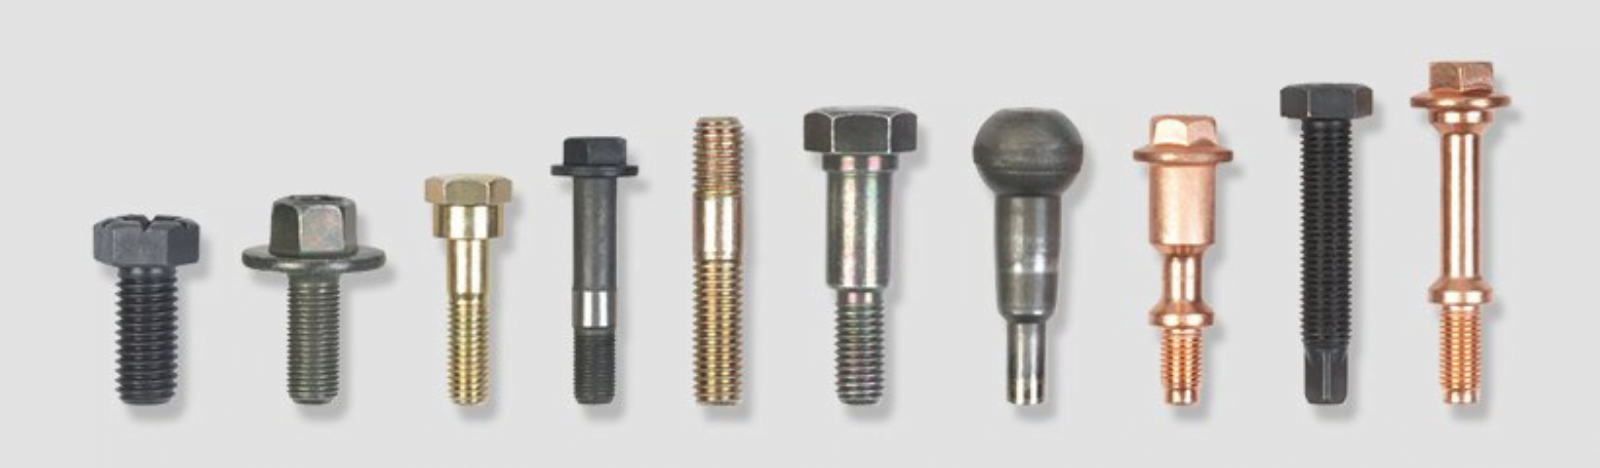 Fasteners Manufacturers in Faridabad